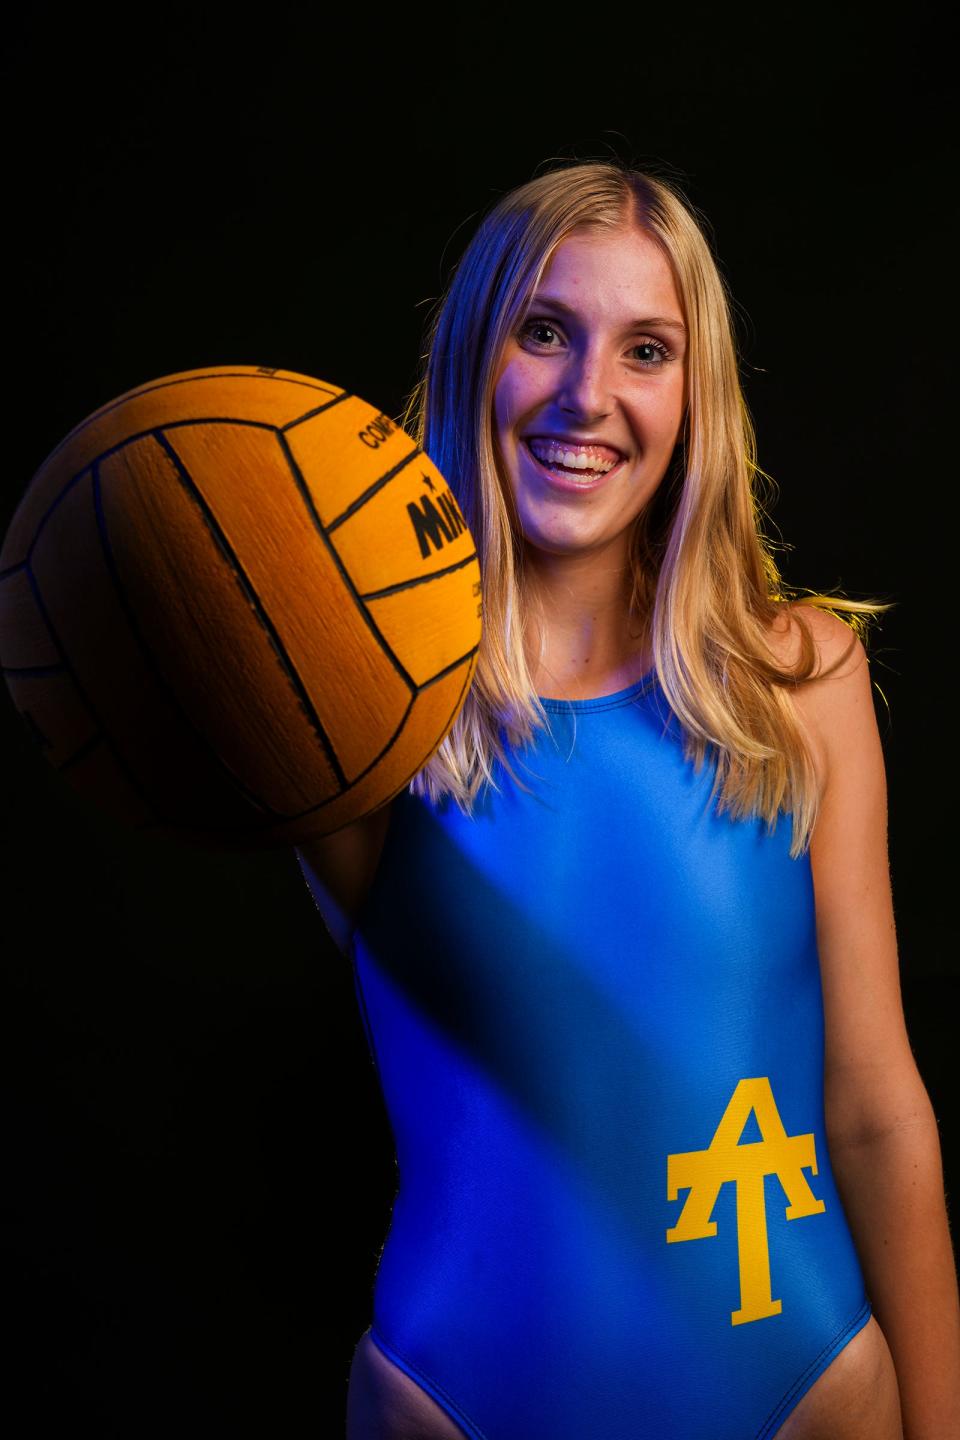 Anderson water polo player Sarah Kester considers her teammates her extended family. She would like to visit California because it has a large water polo community in high schools and colleges.